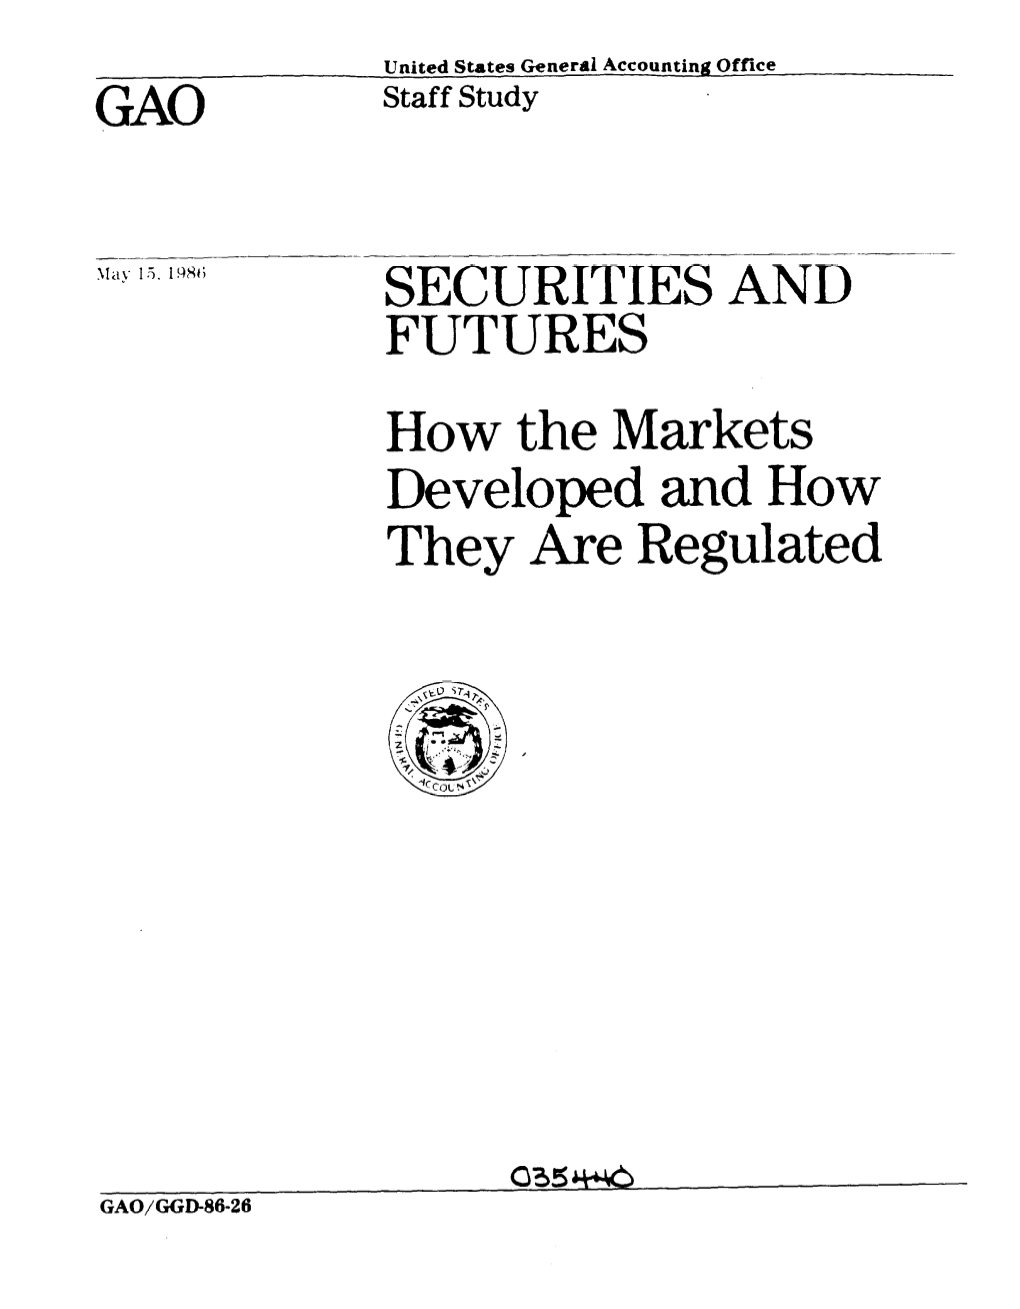 GGD-86-26 Securities and Futures: How the Markets Developed And